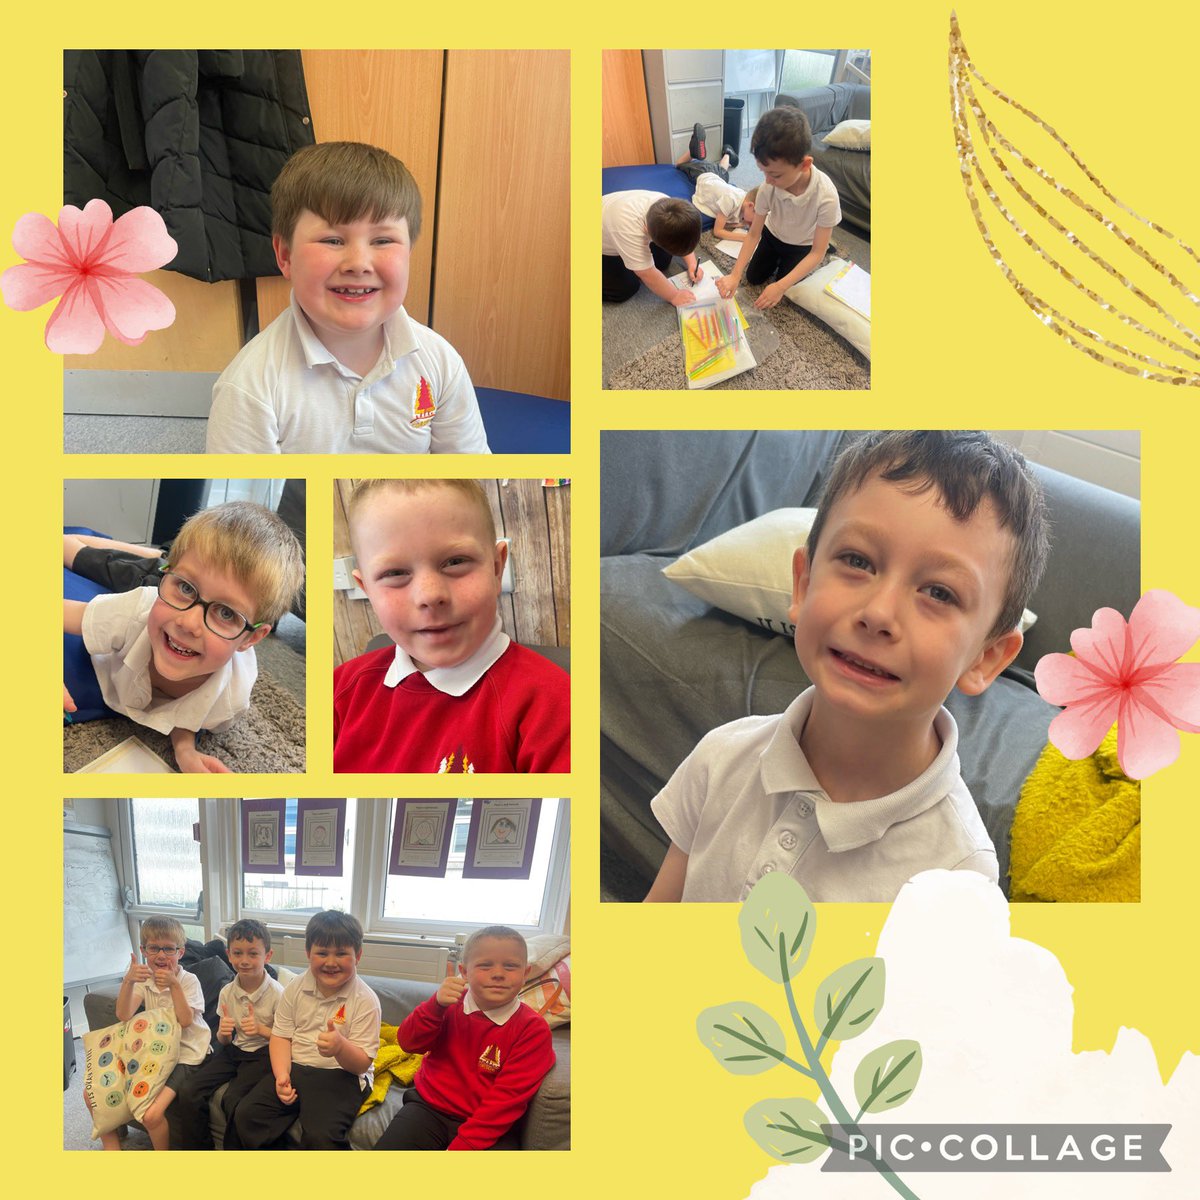 J, M, C & S love going to see Jacqueline, for their group work! Building resilience and positive relationships is so much fun! #groupwork #buildingresilience #comingtogether 💛